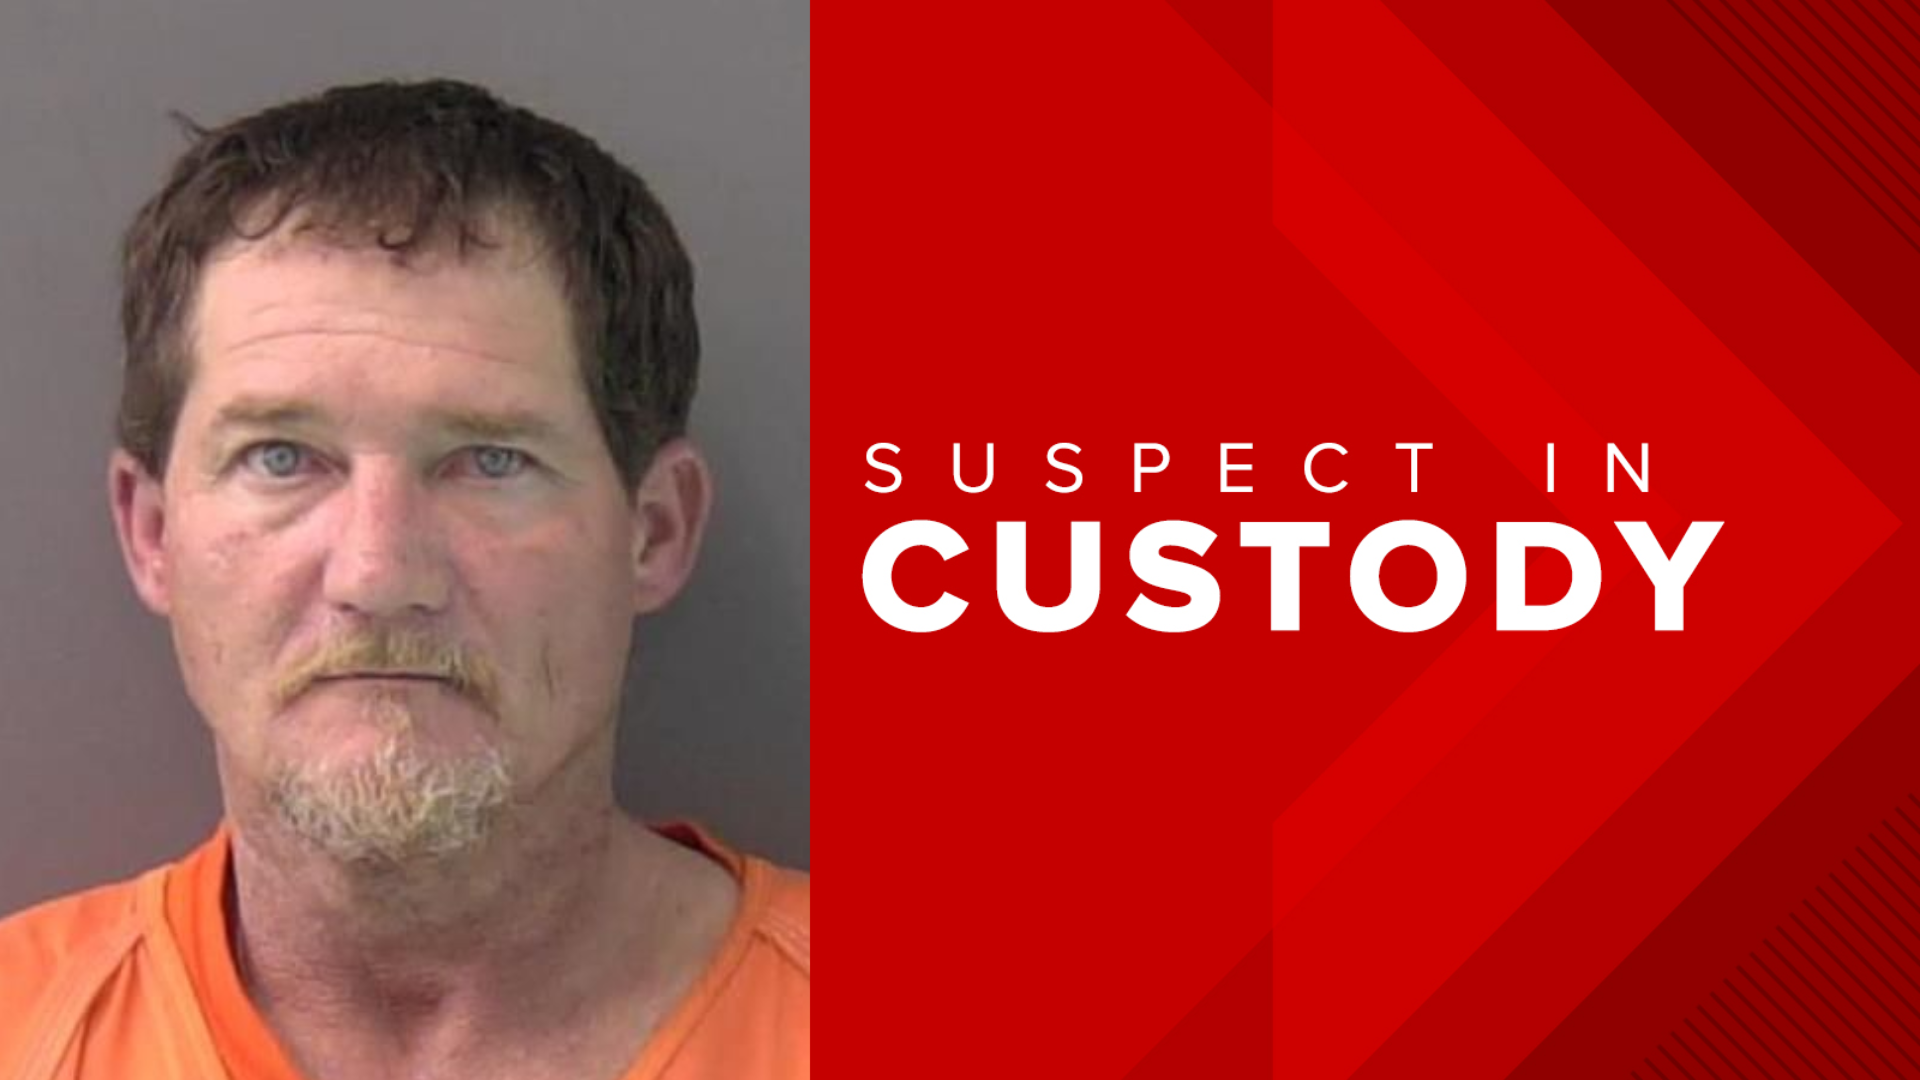 Kevin Smith was taken into custody after an eight-hour standoff.